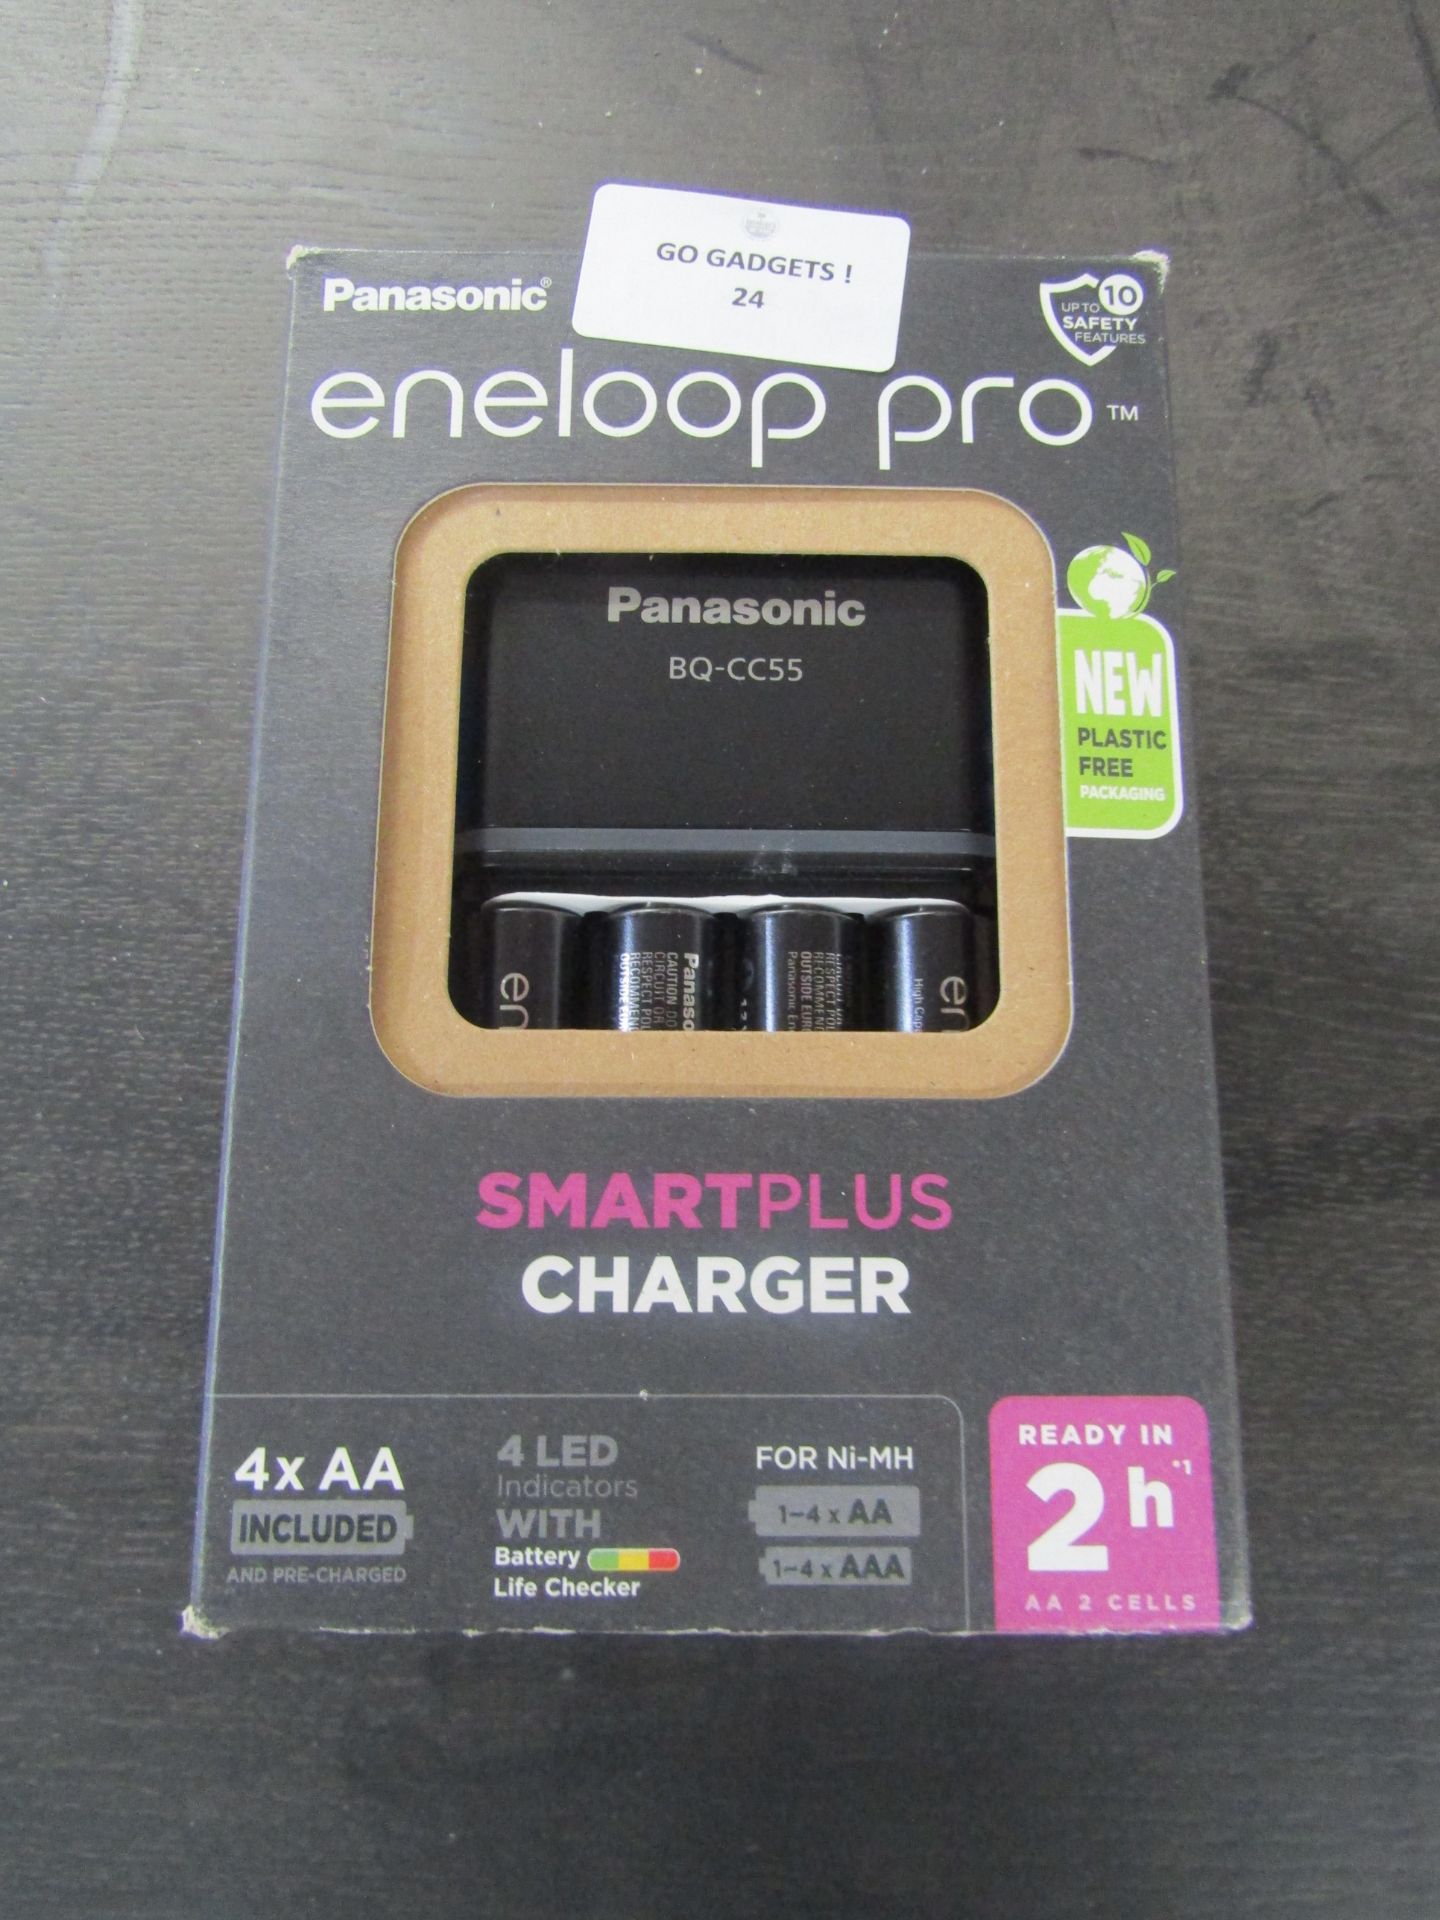 Eneloop SmartPlus charger, for 1-4 AA/AAA rechargeable batteries, 1.5h charging time, 10 safety